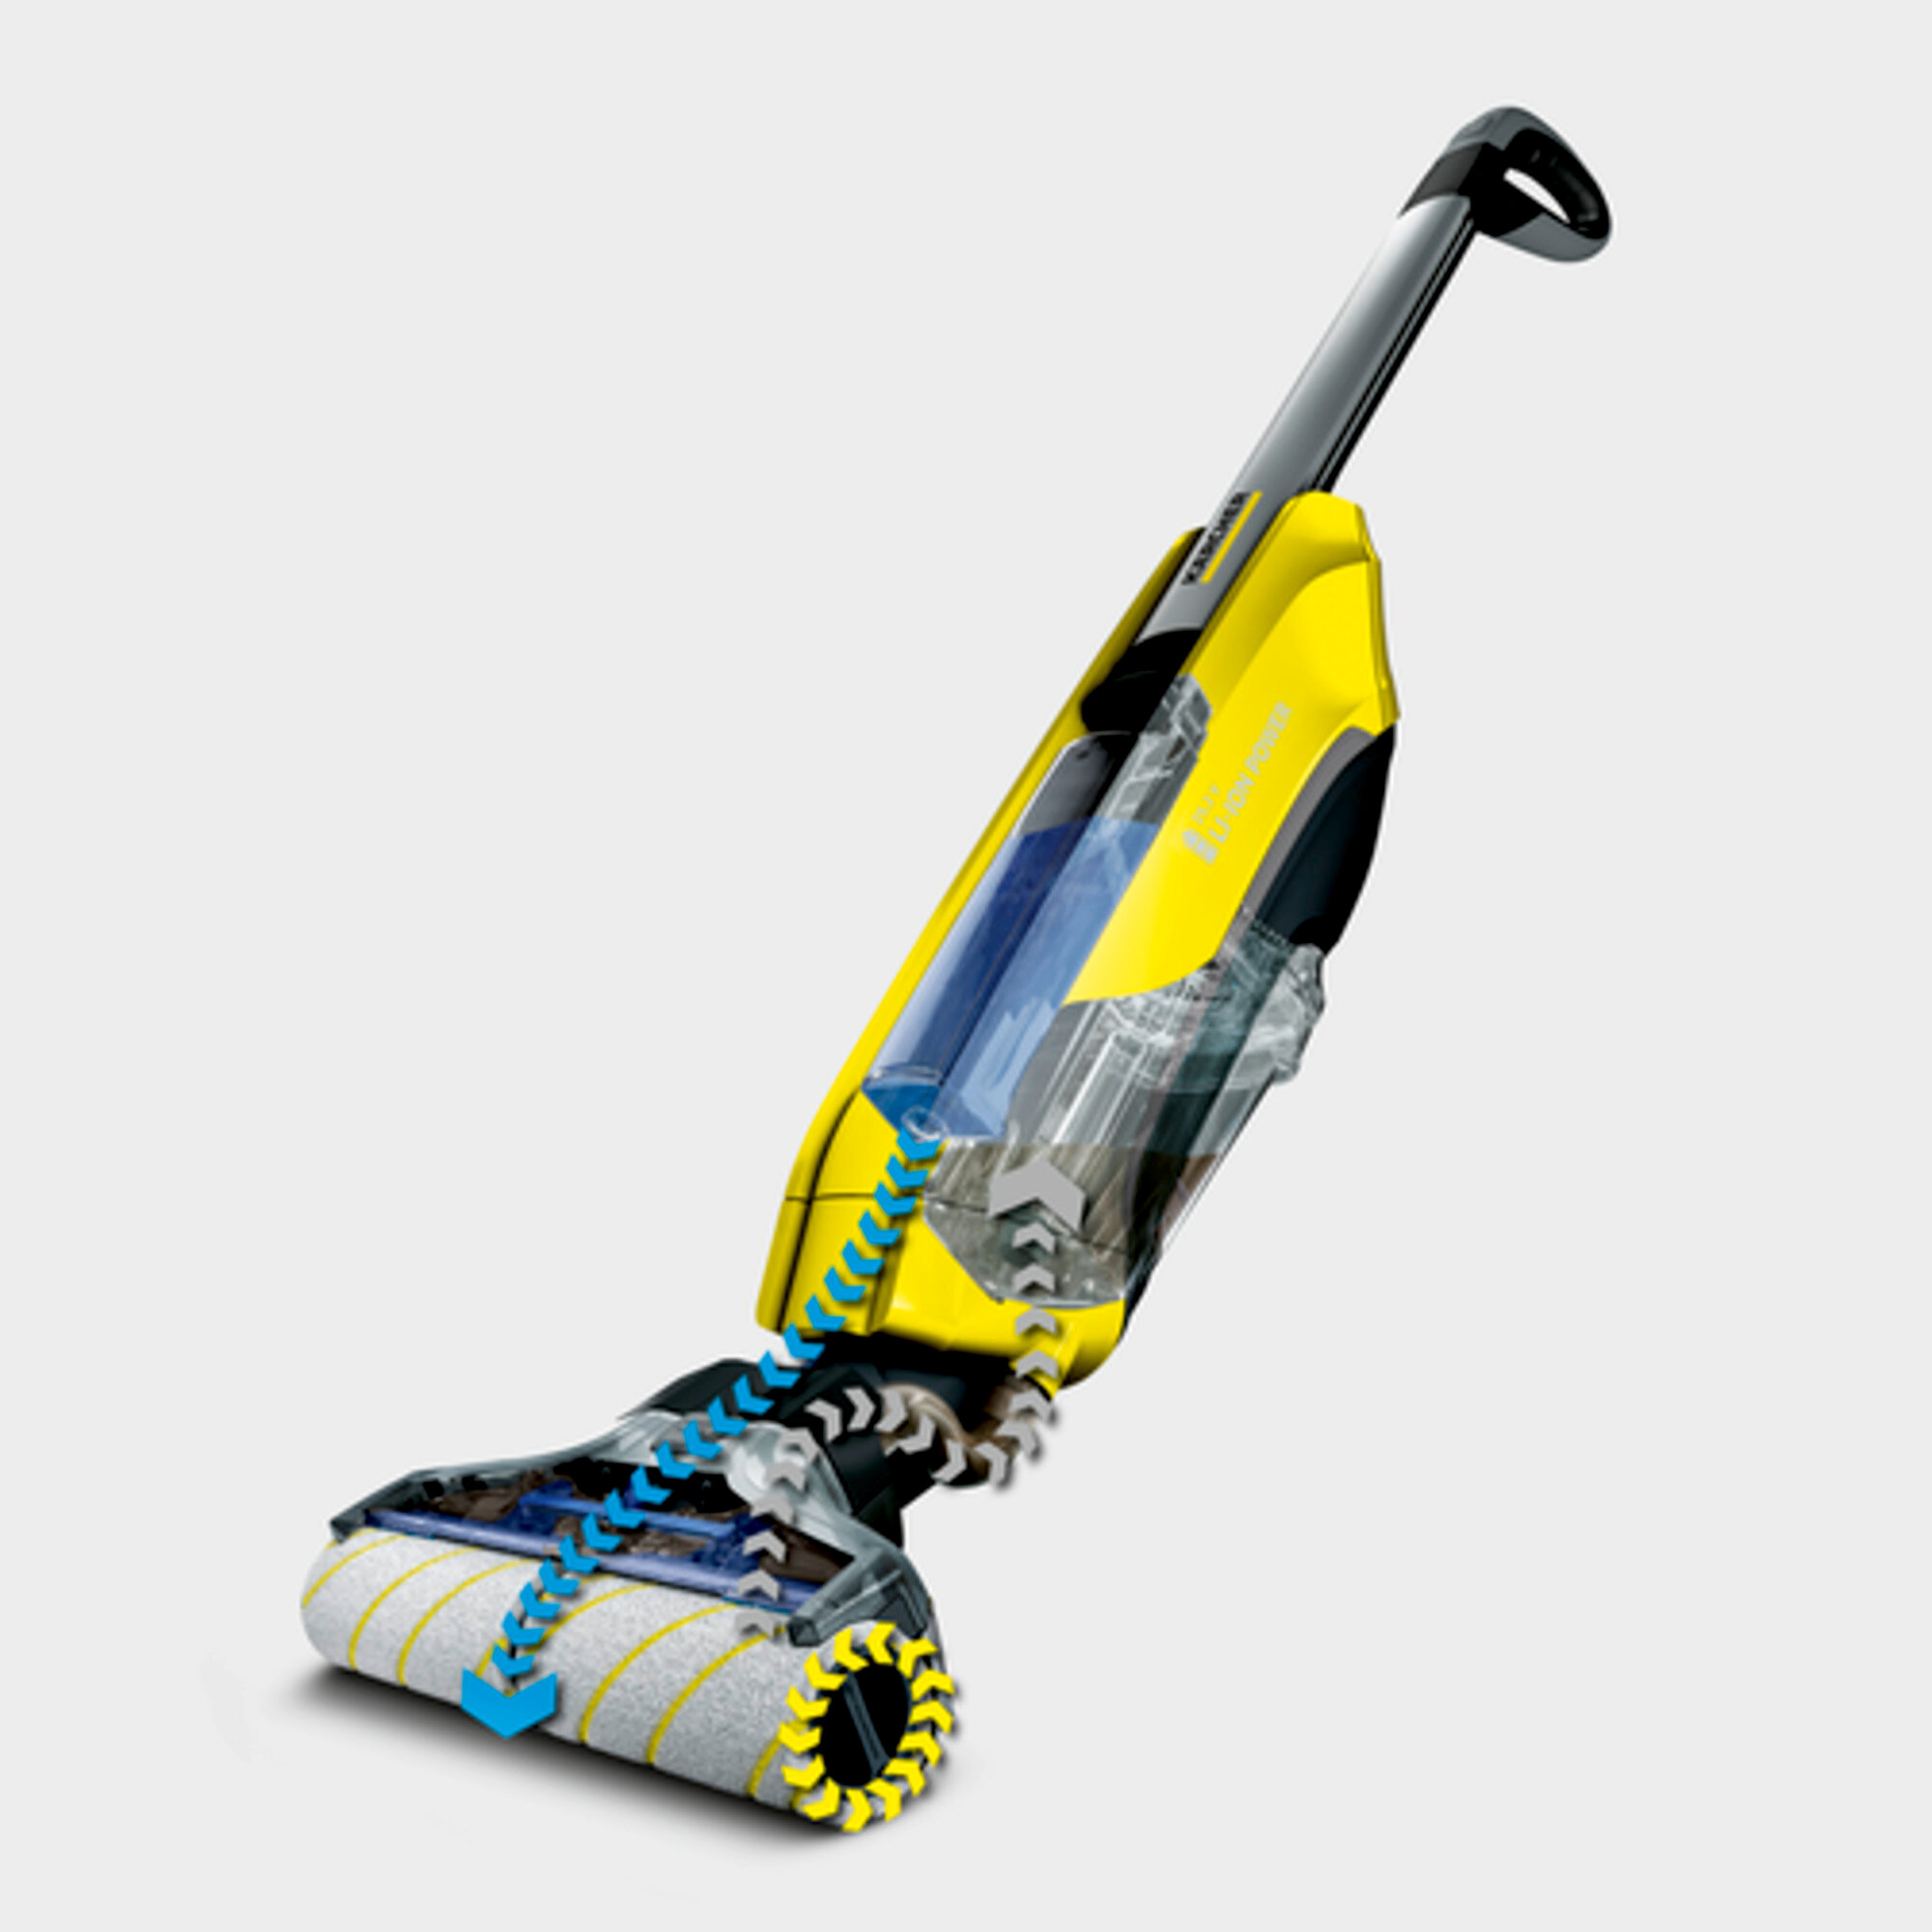 Hard floor cleaner FC 5 Cordless: Wiping is 20 per cent* cleaner than with a mop and much more convenient